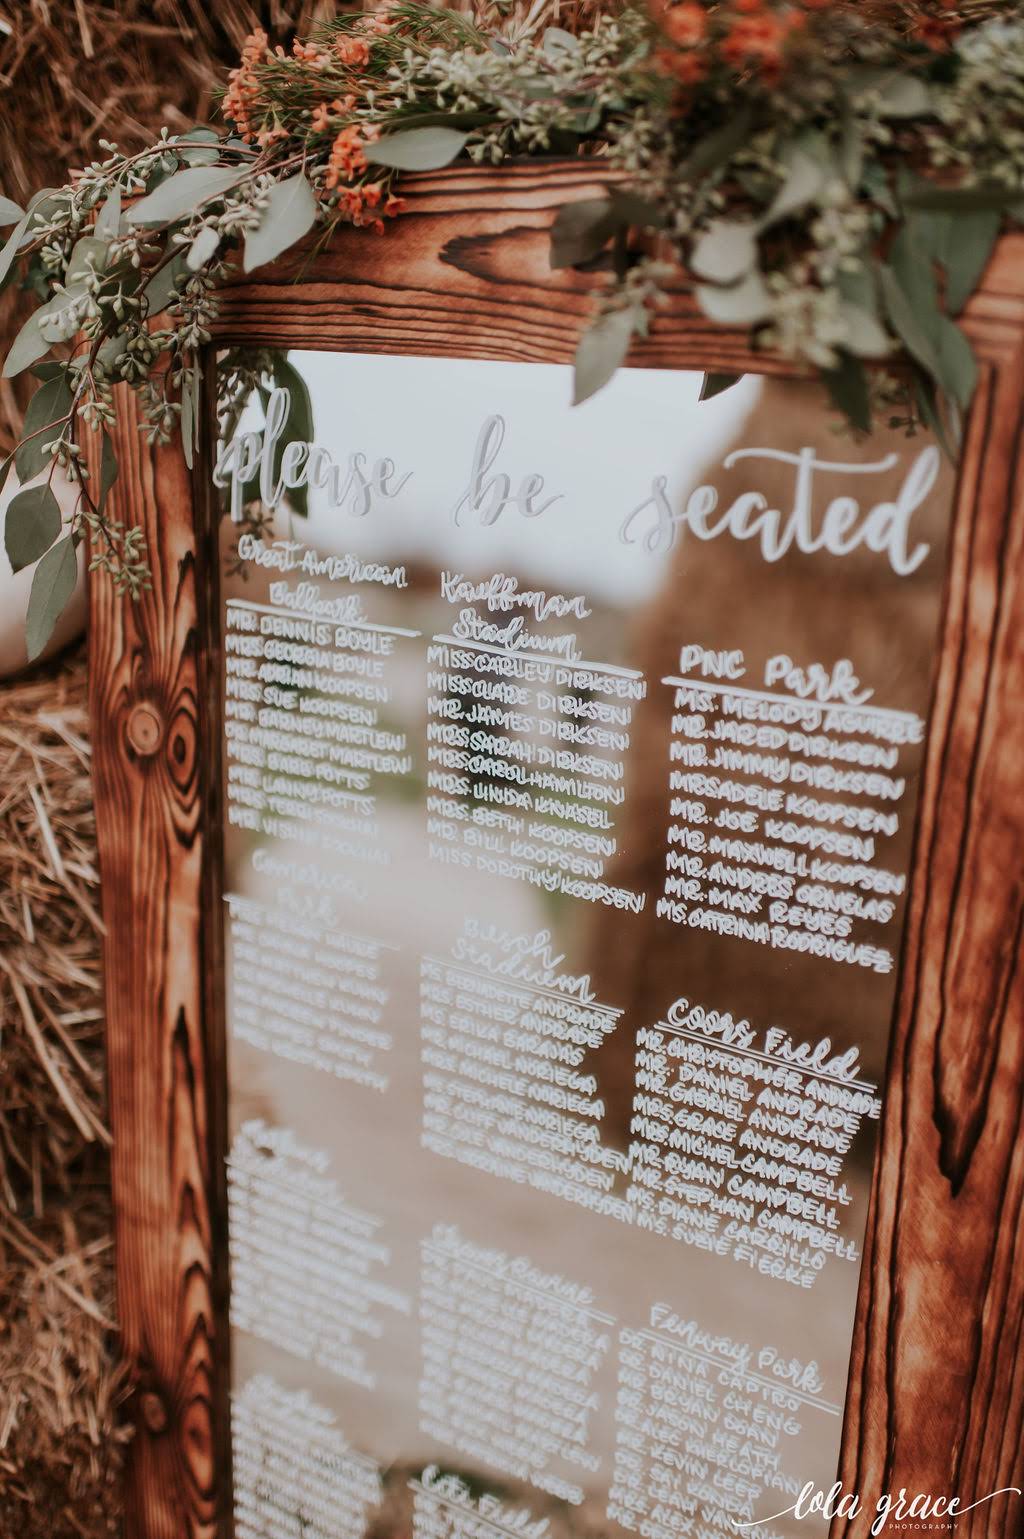 Paul and Michelle picked out this custom framed mirror for Mitten Script by Marah to create their seating chart then use in their home after the wedding.